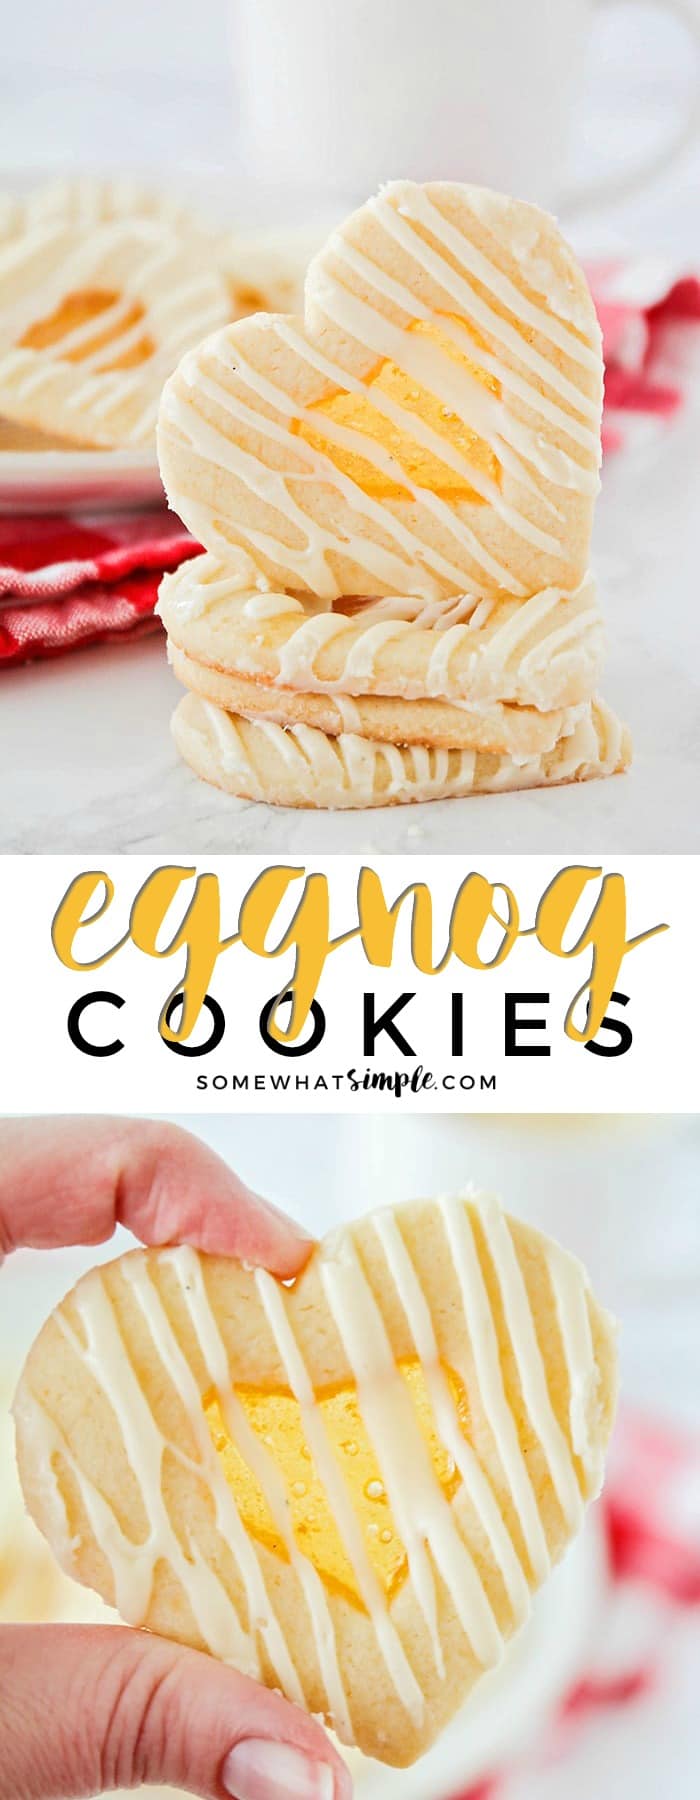 How to make eggnog cookies with a crunchy butterscotch center and a delicious eggnog candy drizzle. These cookies are DELICIOUS!!! via @somewhatsimple